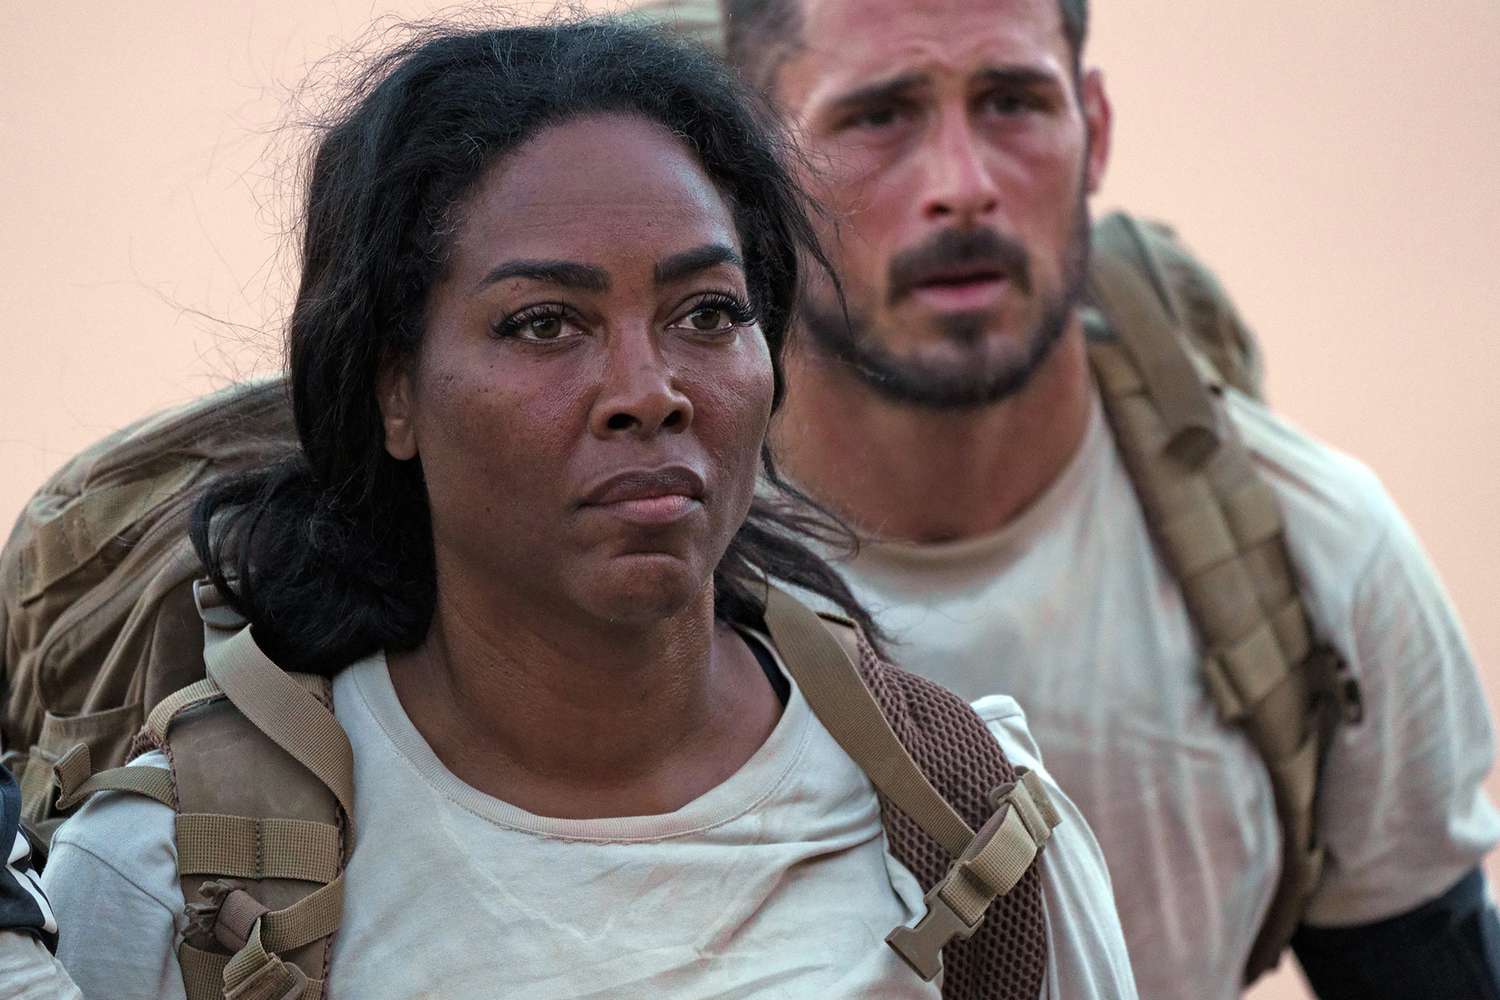 Kenya Moore Faked Her Scenes On ‘Special Forces: World’s Toughest Test’ … Stunt Double Exposed